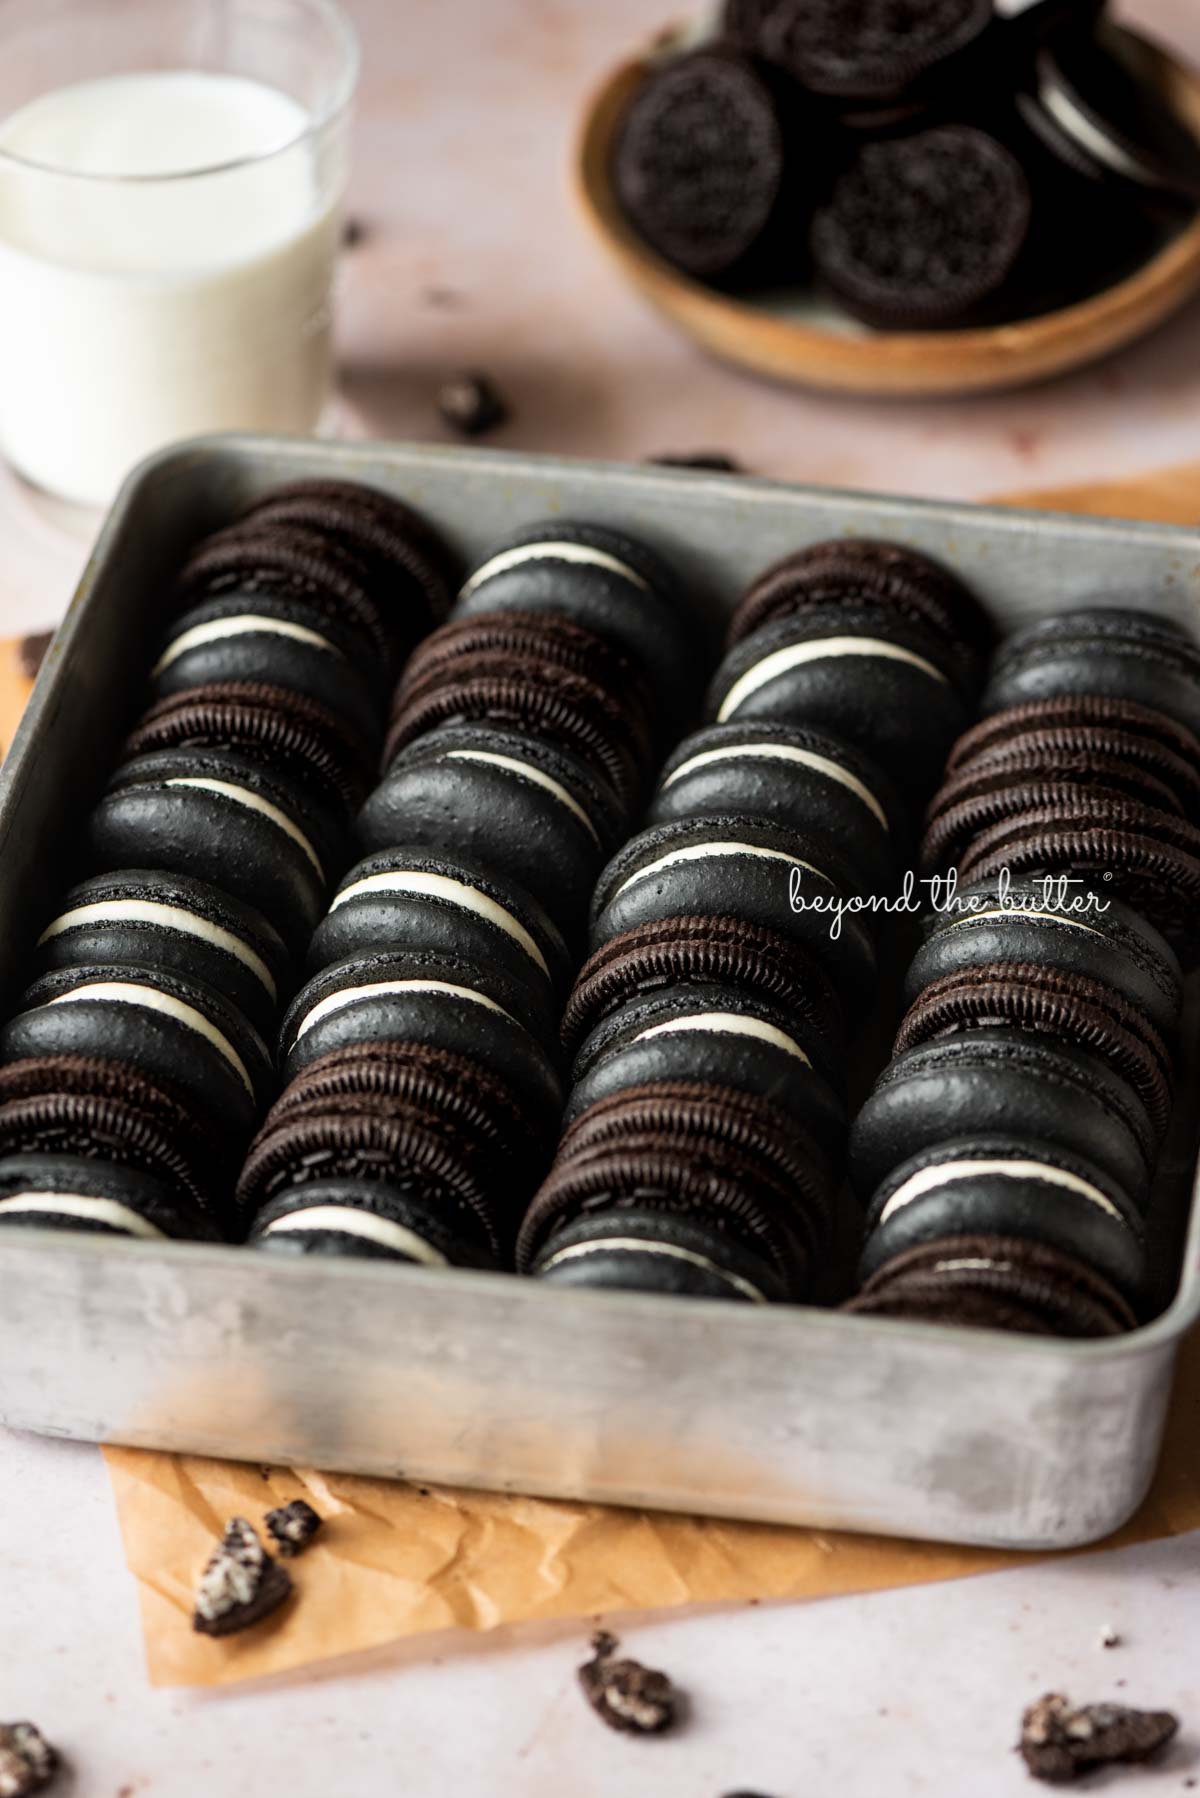 Oreo macarons and oreo cookies in a vintage baking tin on parchment paper with a glass of milk and bowl of oreo cookies in the background.